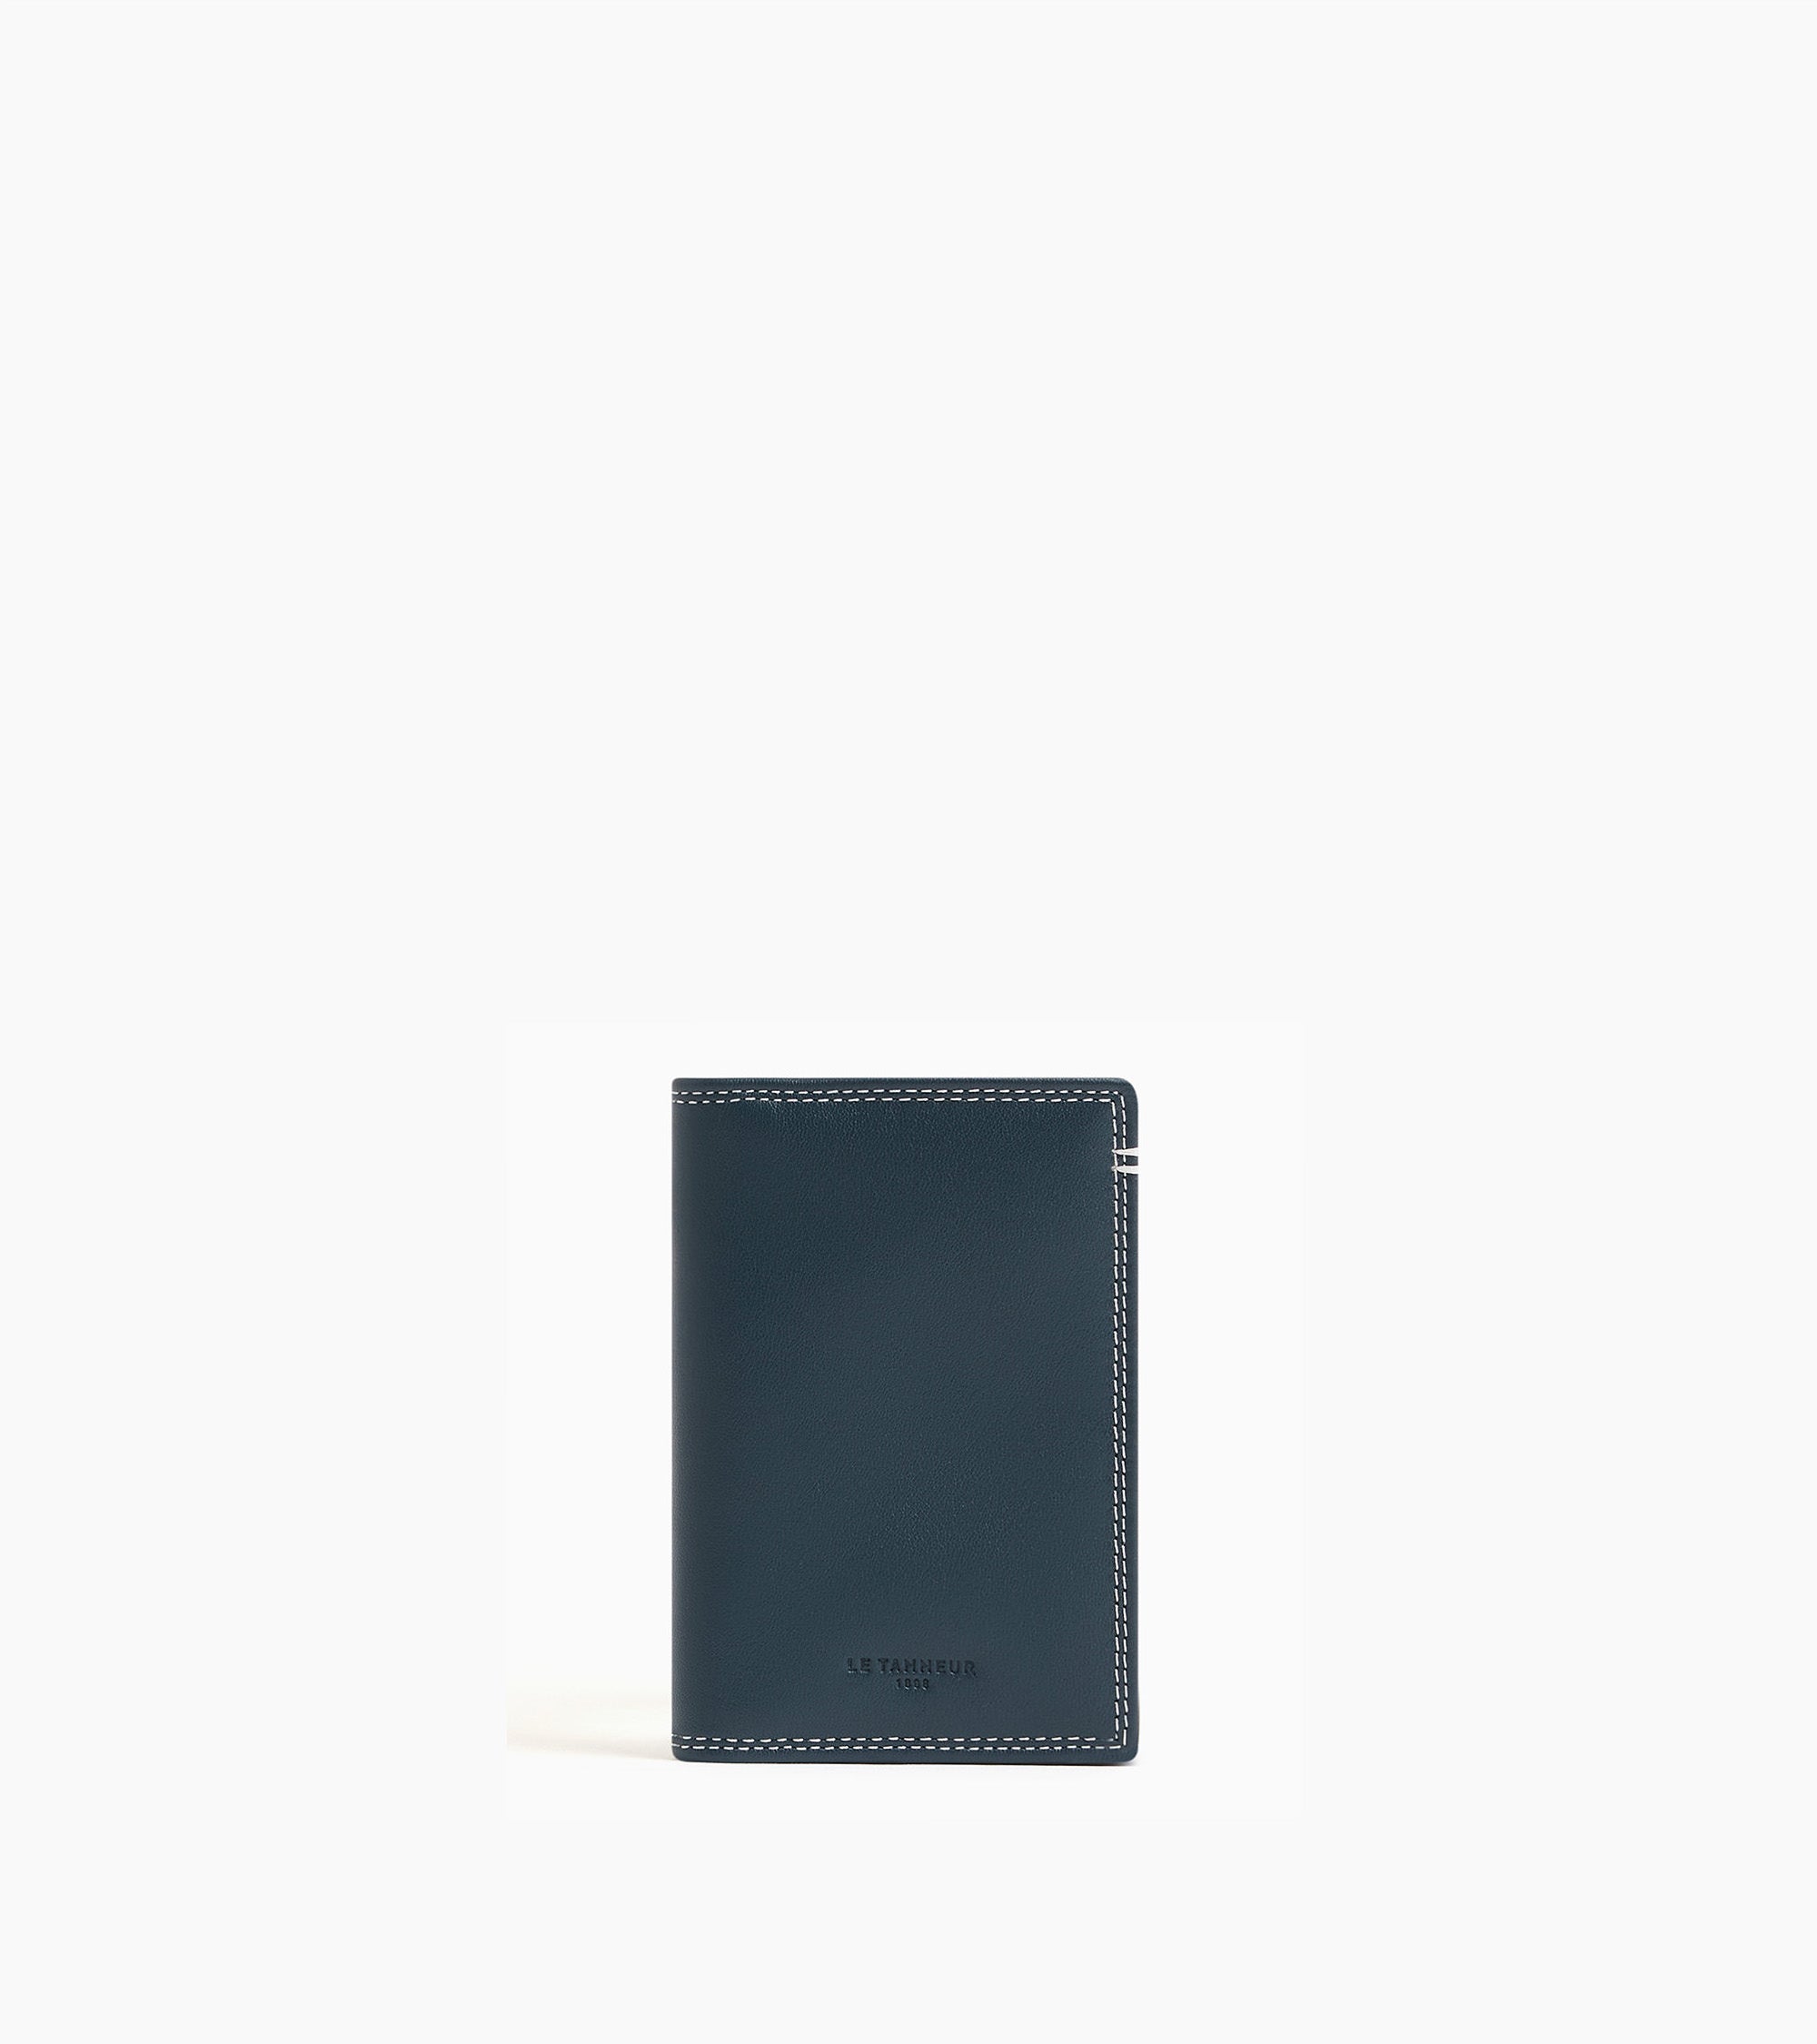 Martin smooth leather vertical card holder